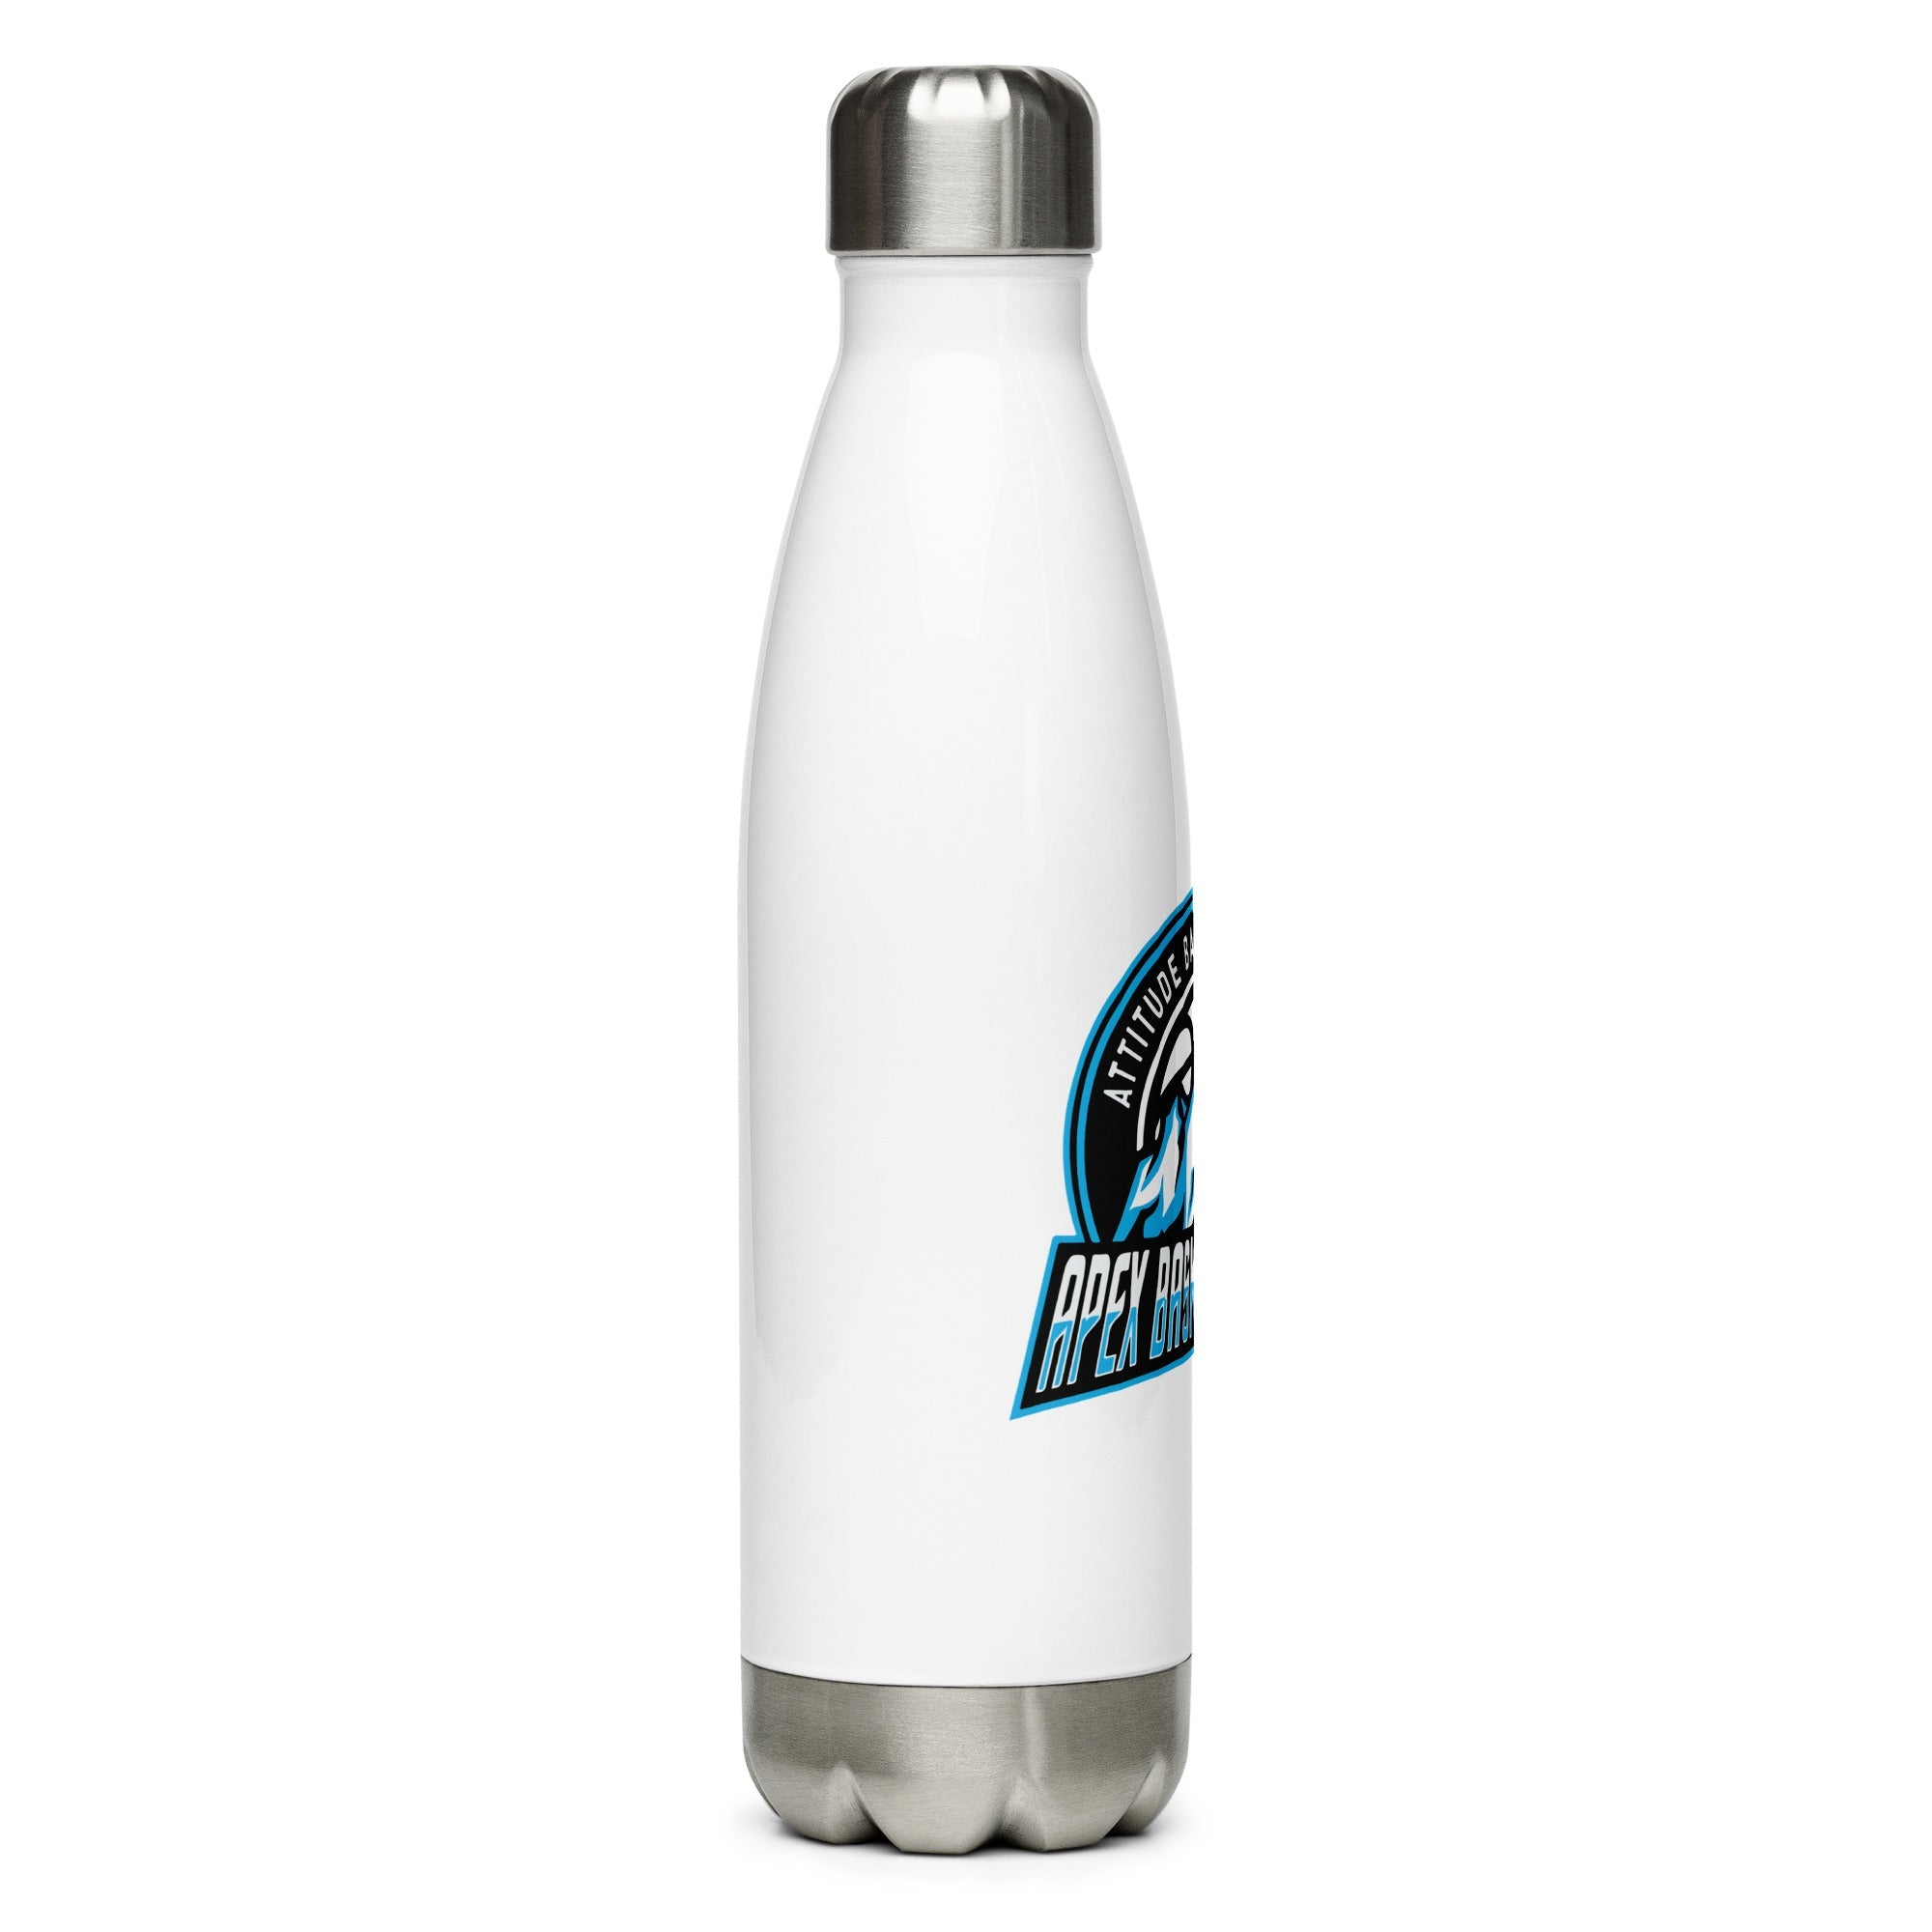 ABC Stainless Steel Water Bottle